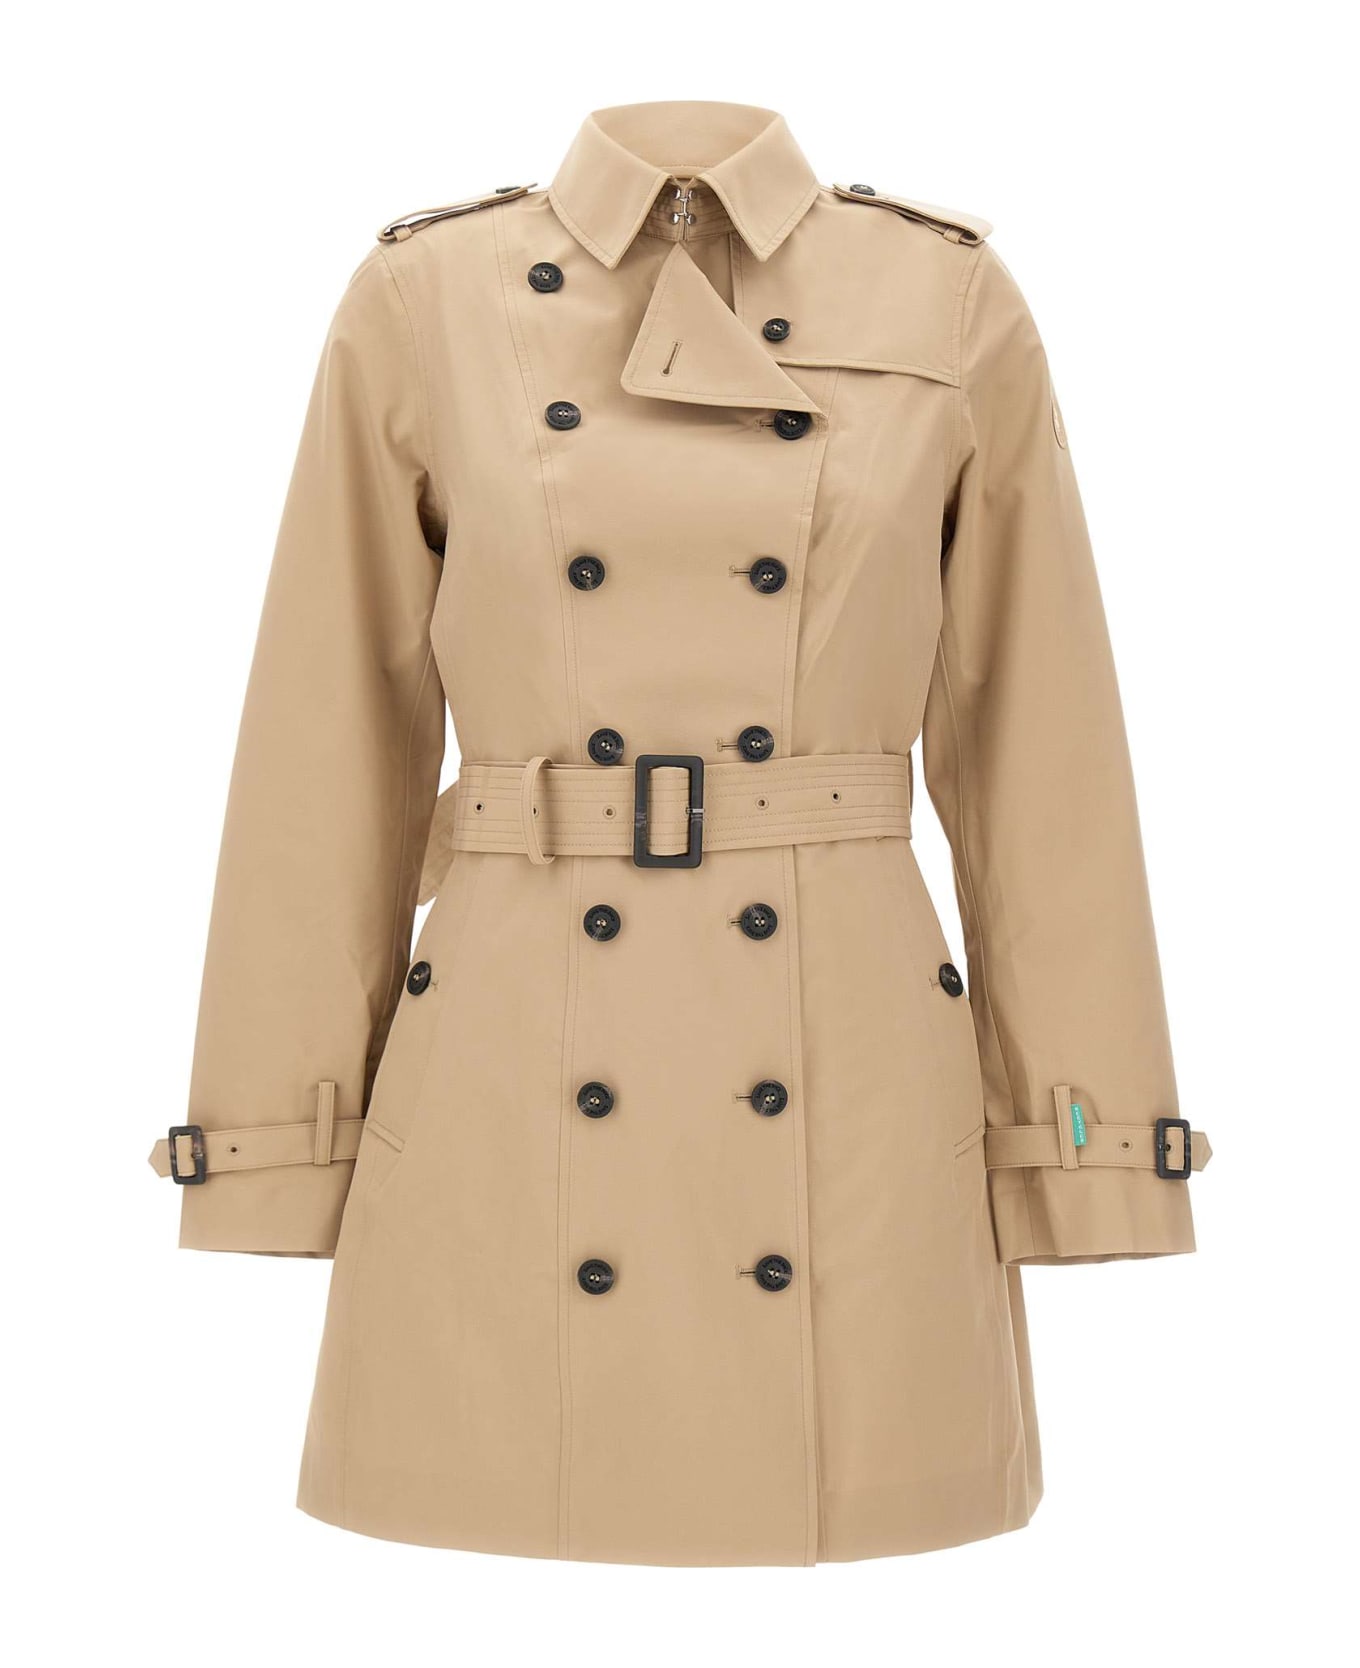 Save the Duck "grin18 Audrey" Trench Coat - BEIGE